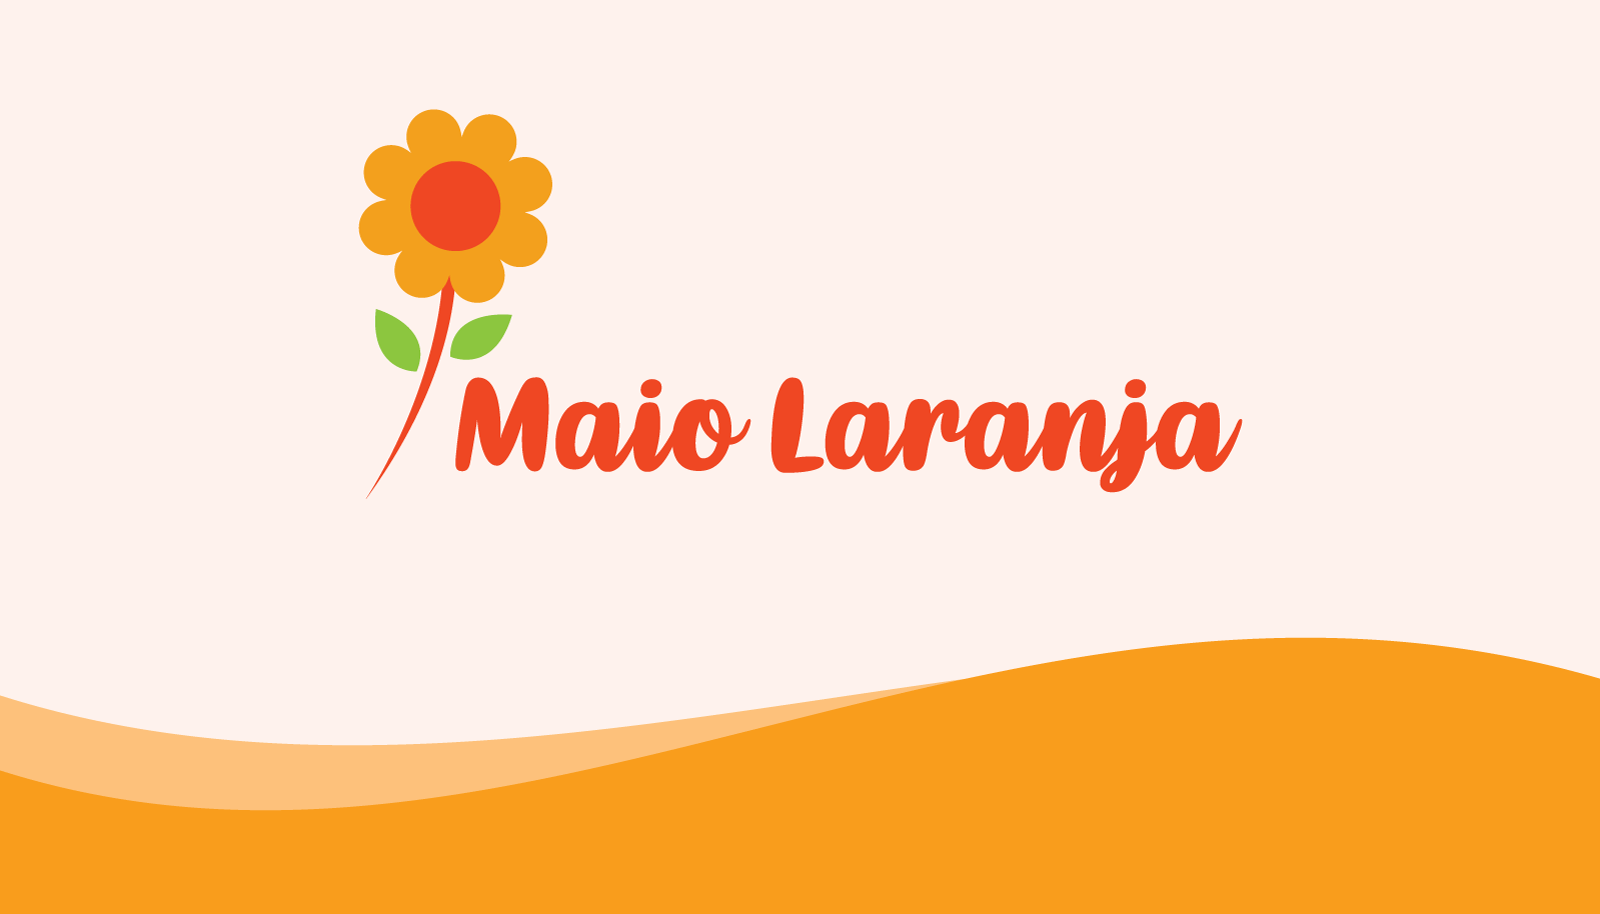 Maio laranja campaign against violence research of children 18 may flat design